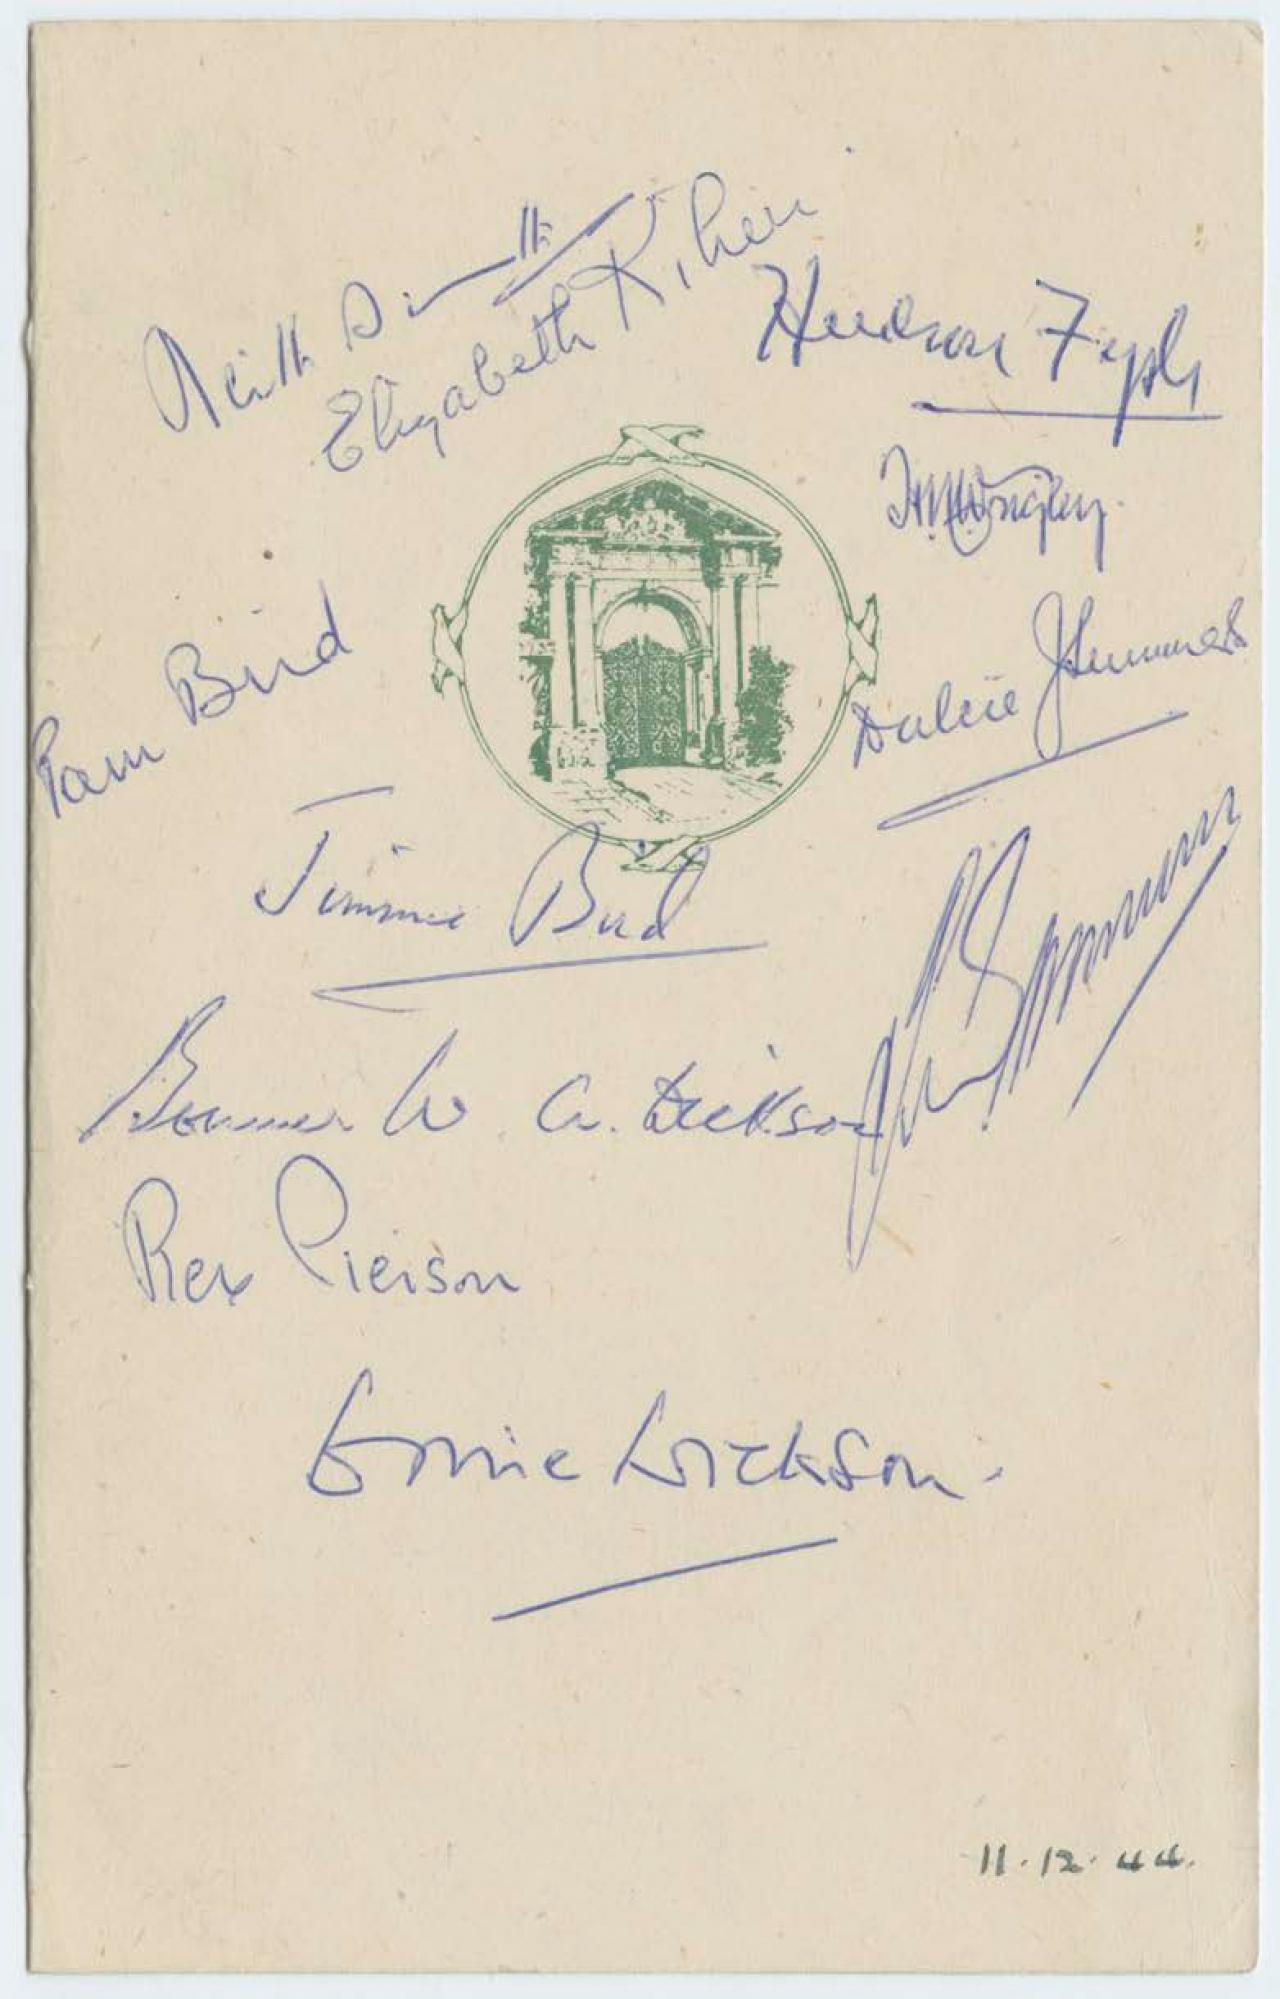 •	Autographed menu from Grosvenor House, London. Autographs include those of Keith Smith, Hudson Fysh and Rex Pierson (Vickers Ltd). SLSA: PRG 18/57/1